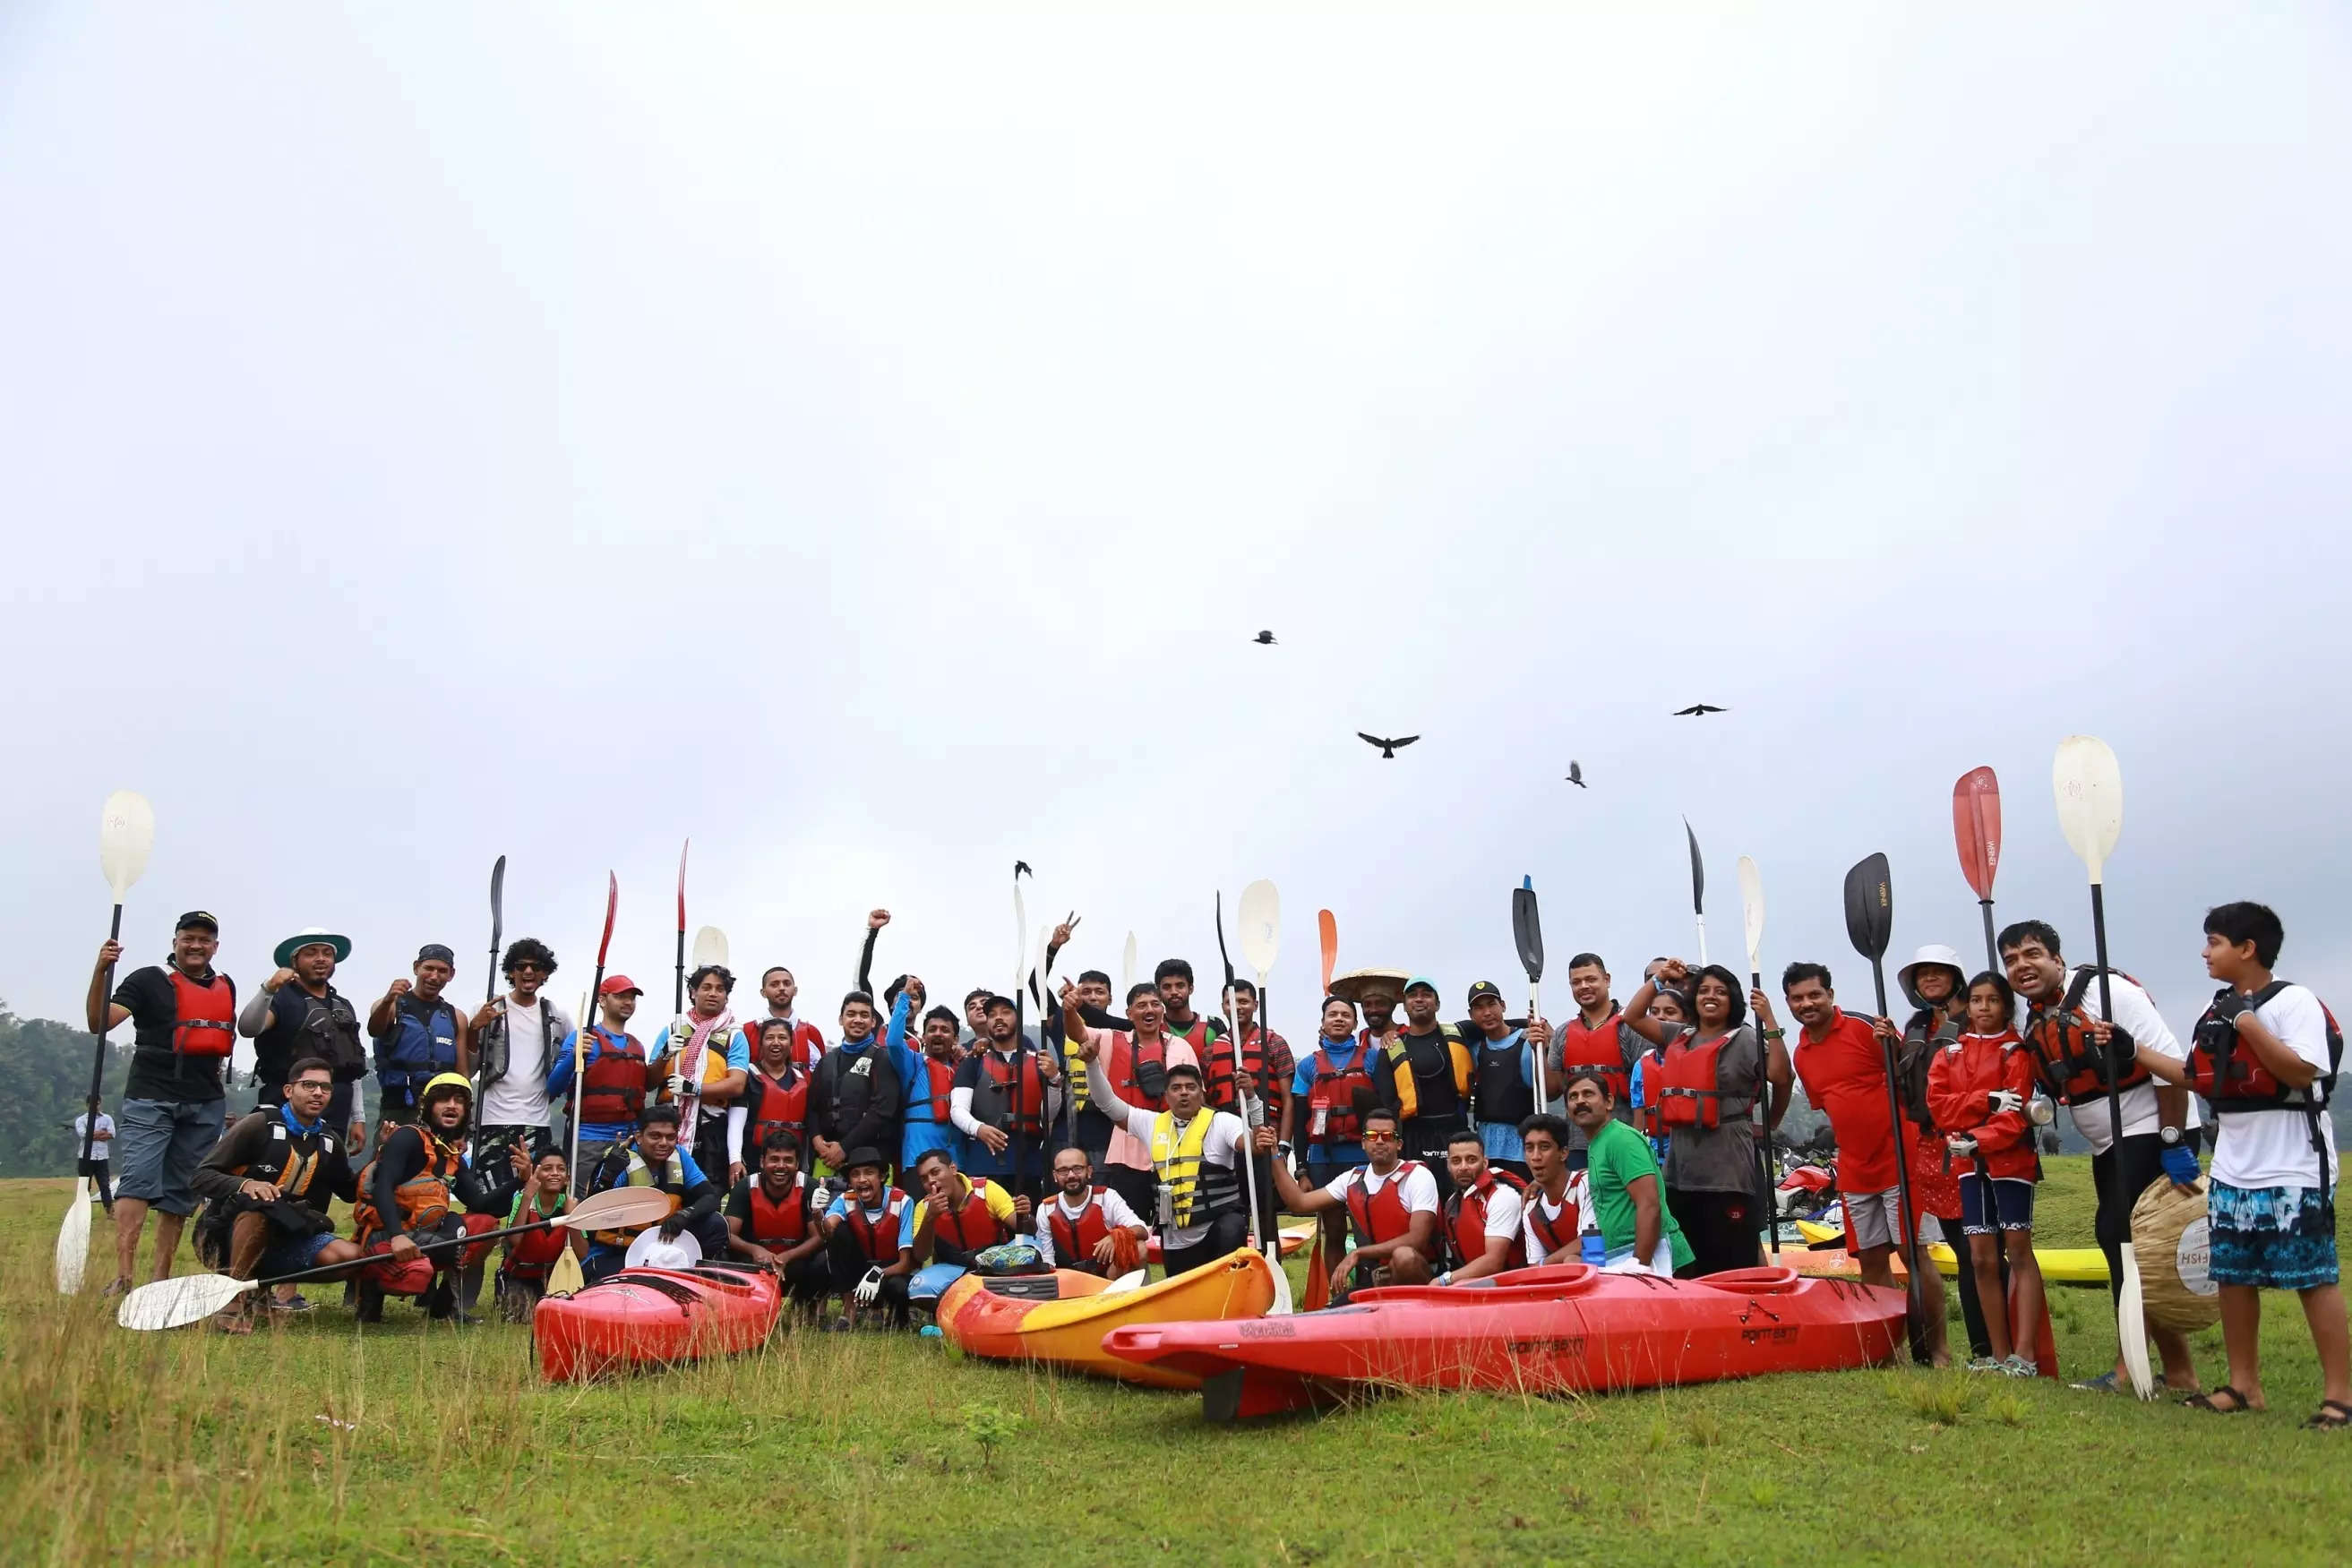 Jellyfish, Kerala Tourism announces the 7th edition of 'Chaliyar River Paddle'